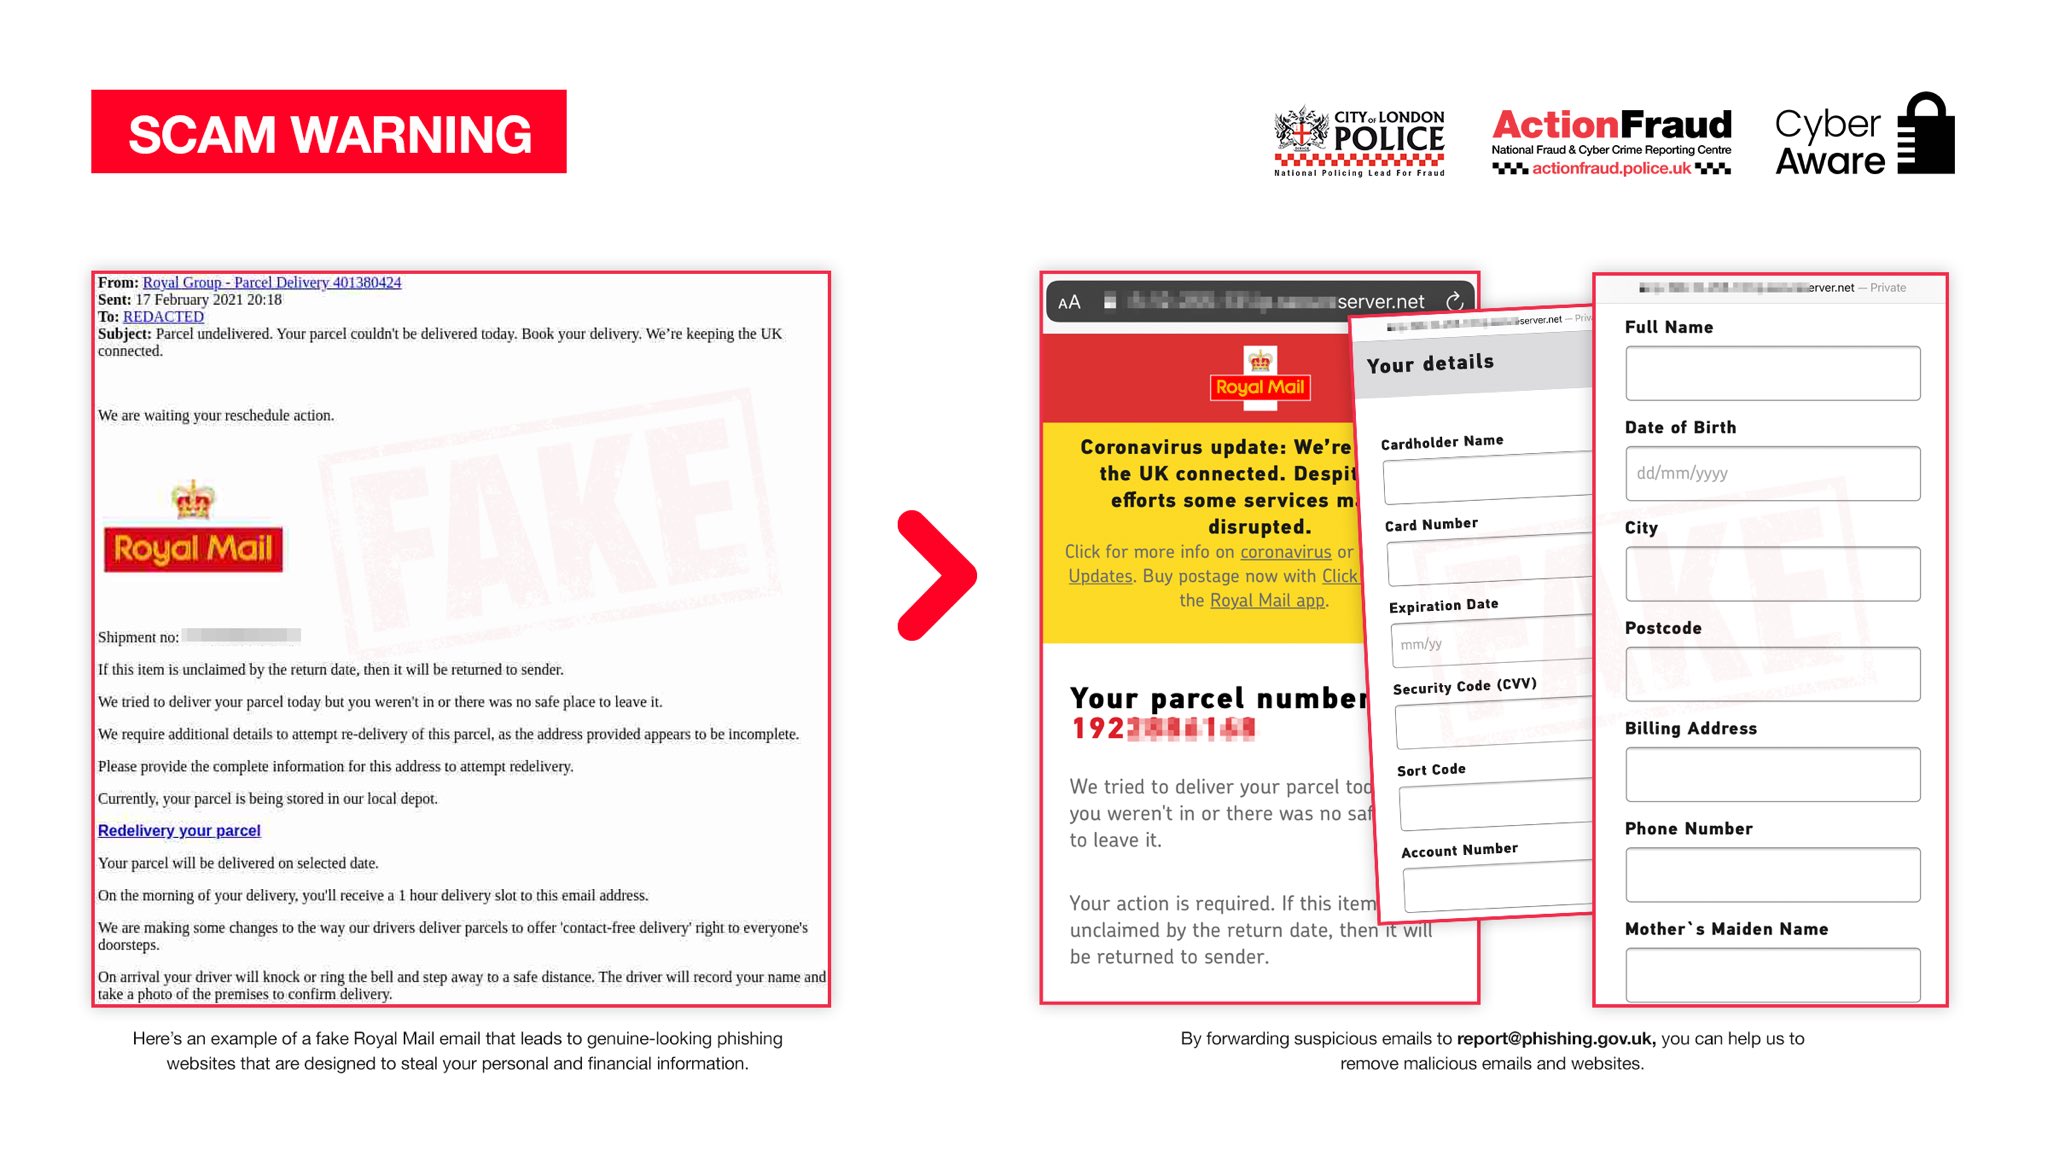 NEWS | Police issue warning after residents targeted by fake Royal Mail emails